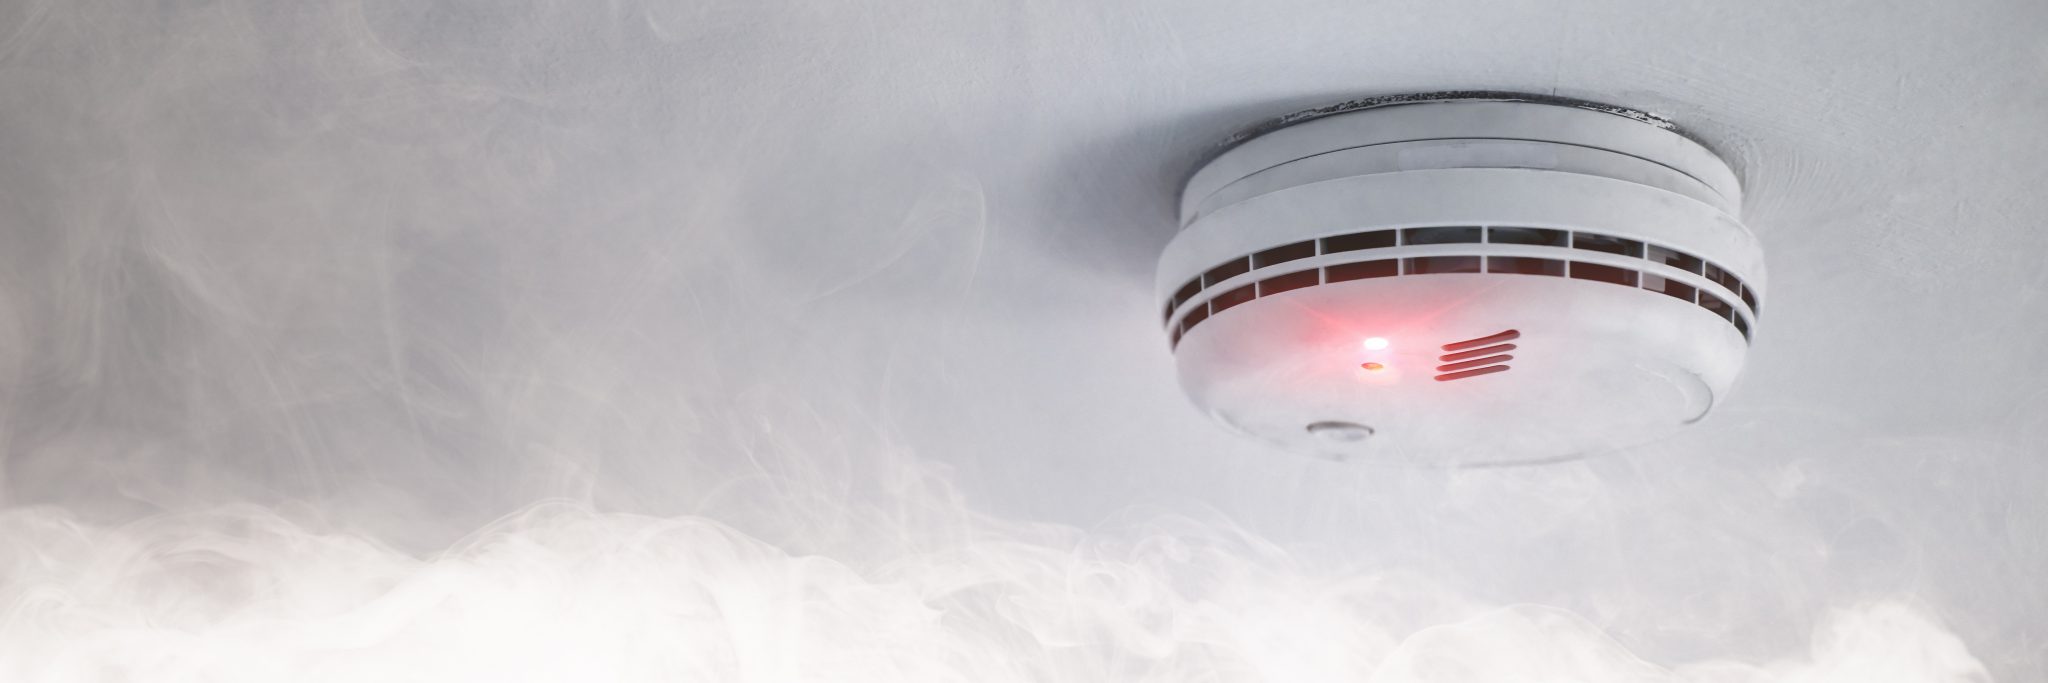 Smoke detector in case of fire alarm as fire protection warning